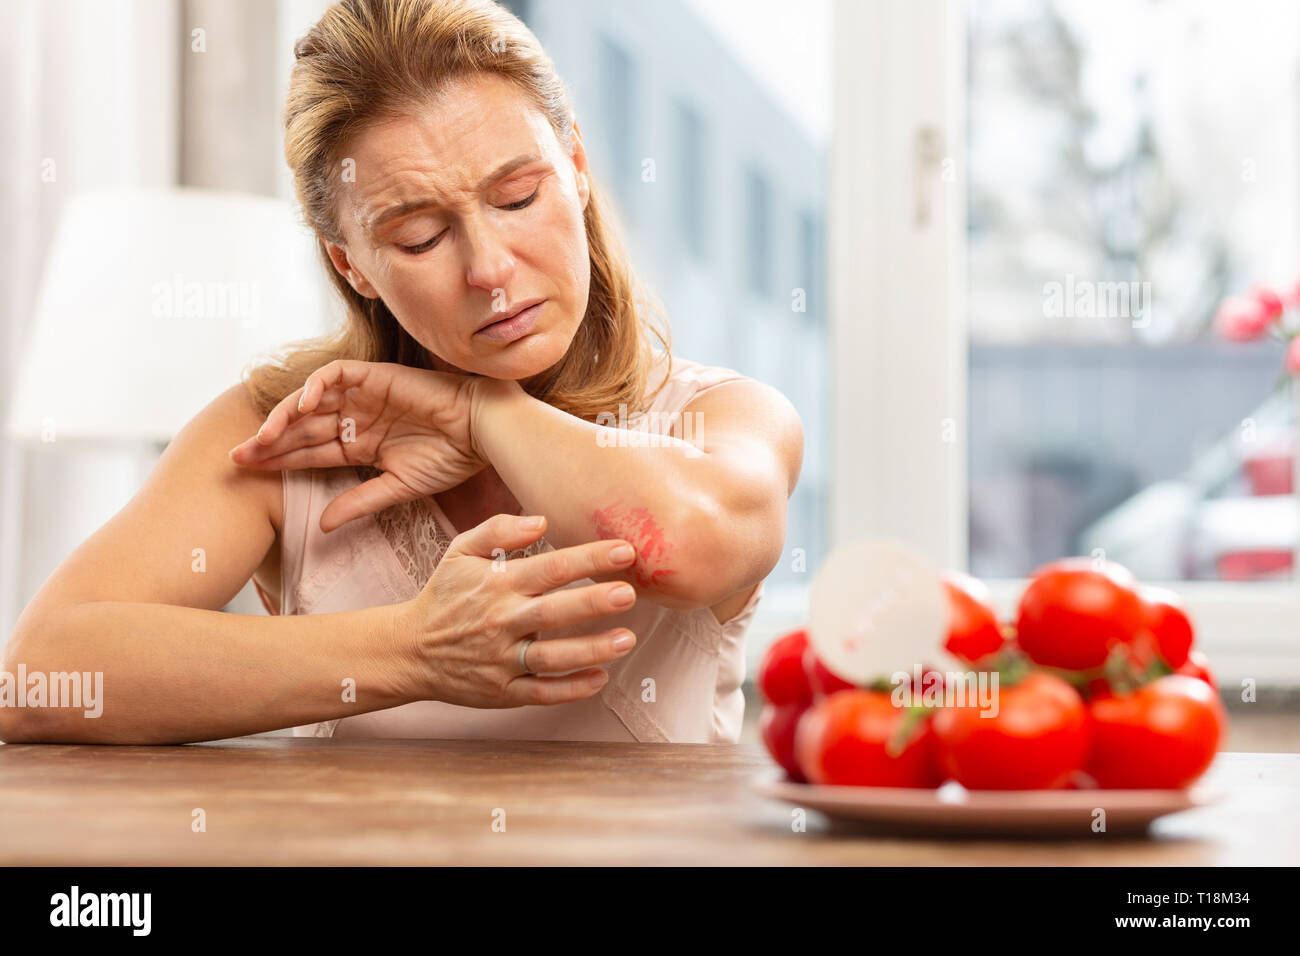 Woman having rash and scratches on elbow because of allergy Stock Photo